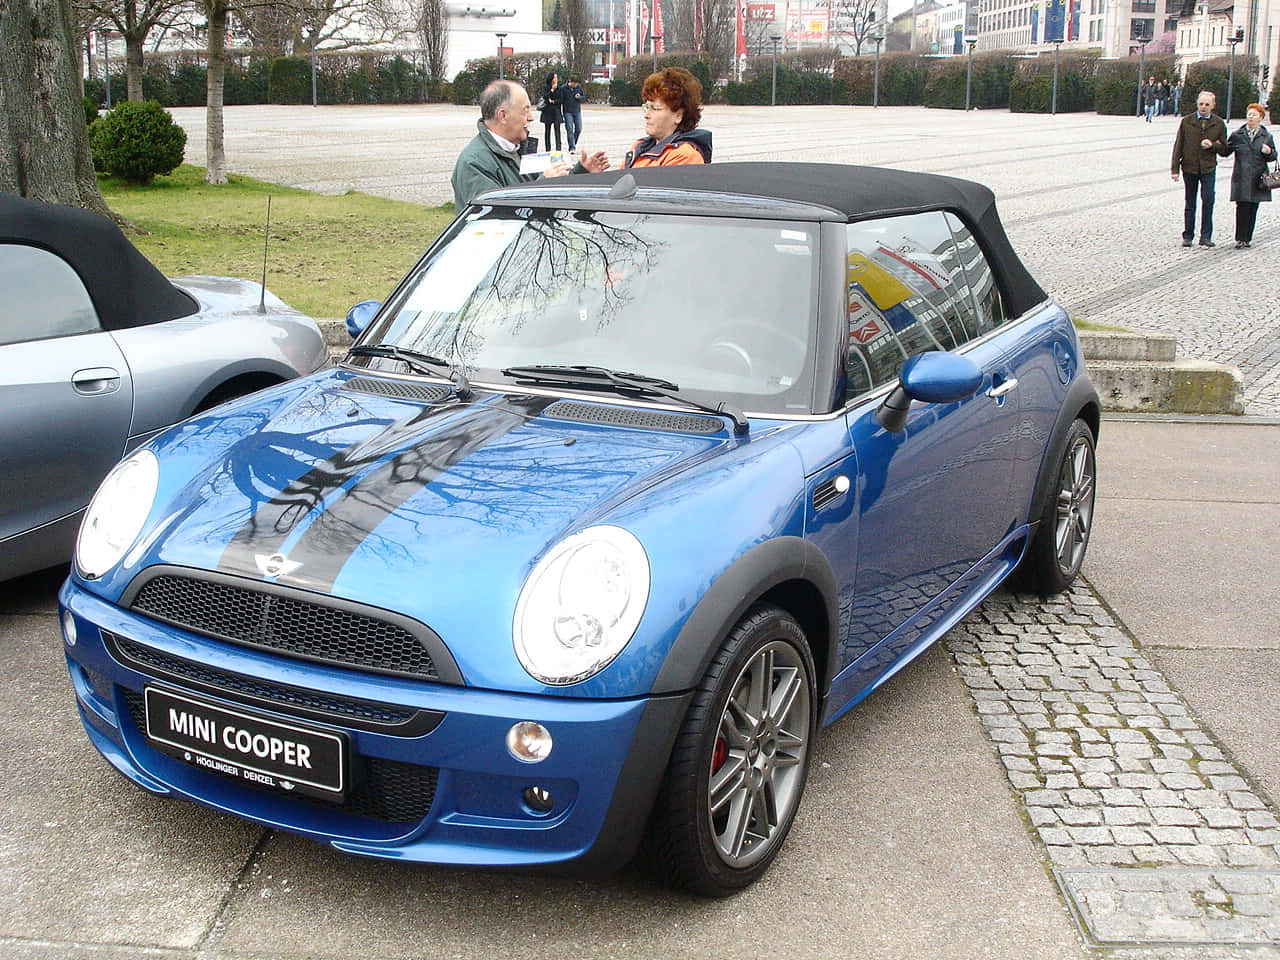 Caption: Relax and Enjoy the Ride: Mini Cooper Convertible Wallpaper